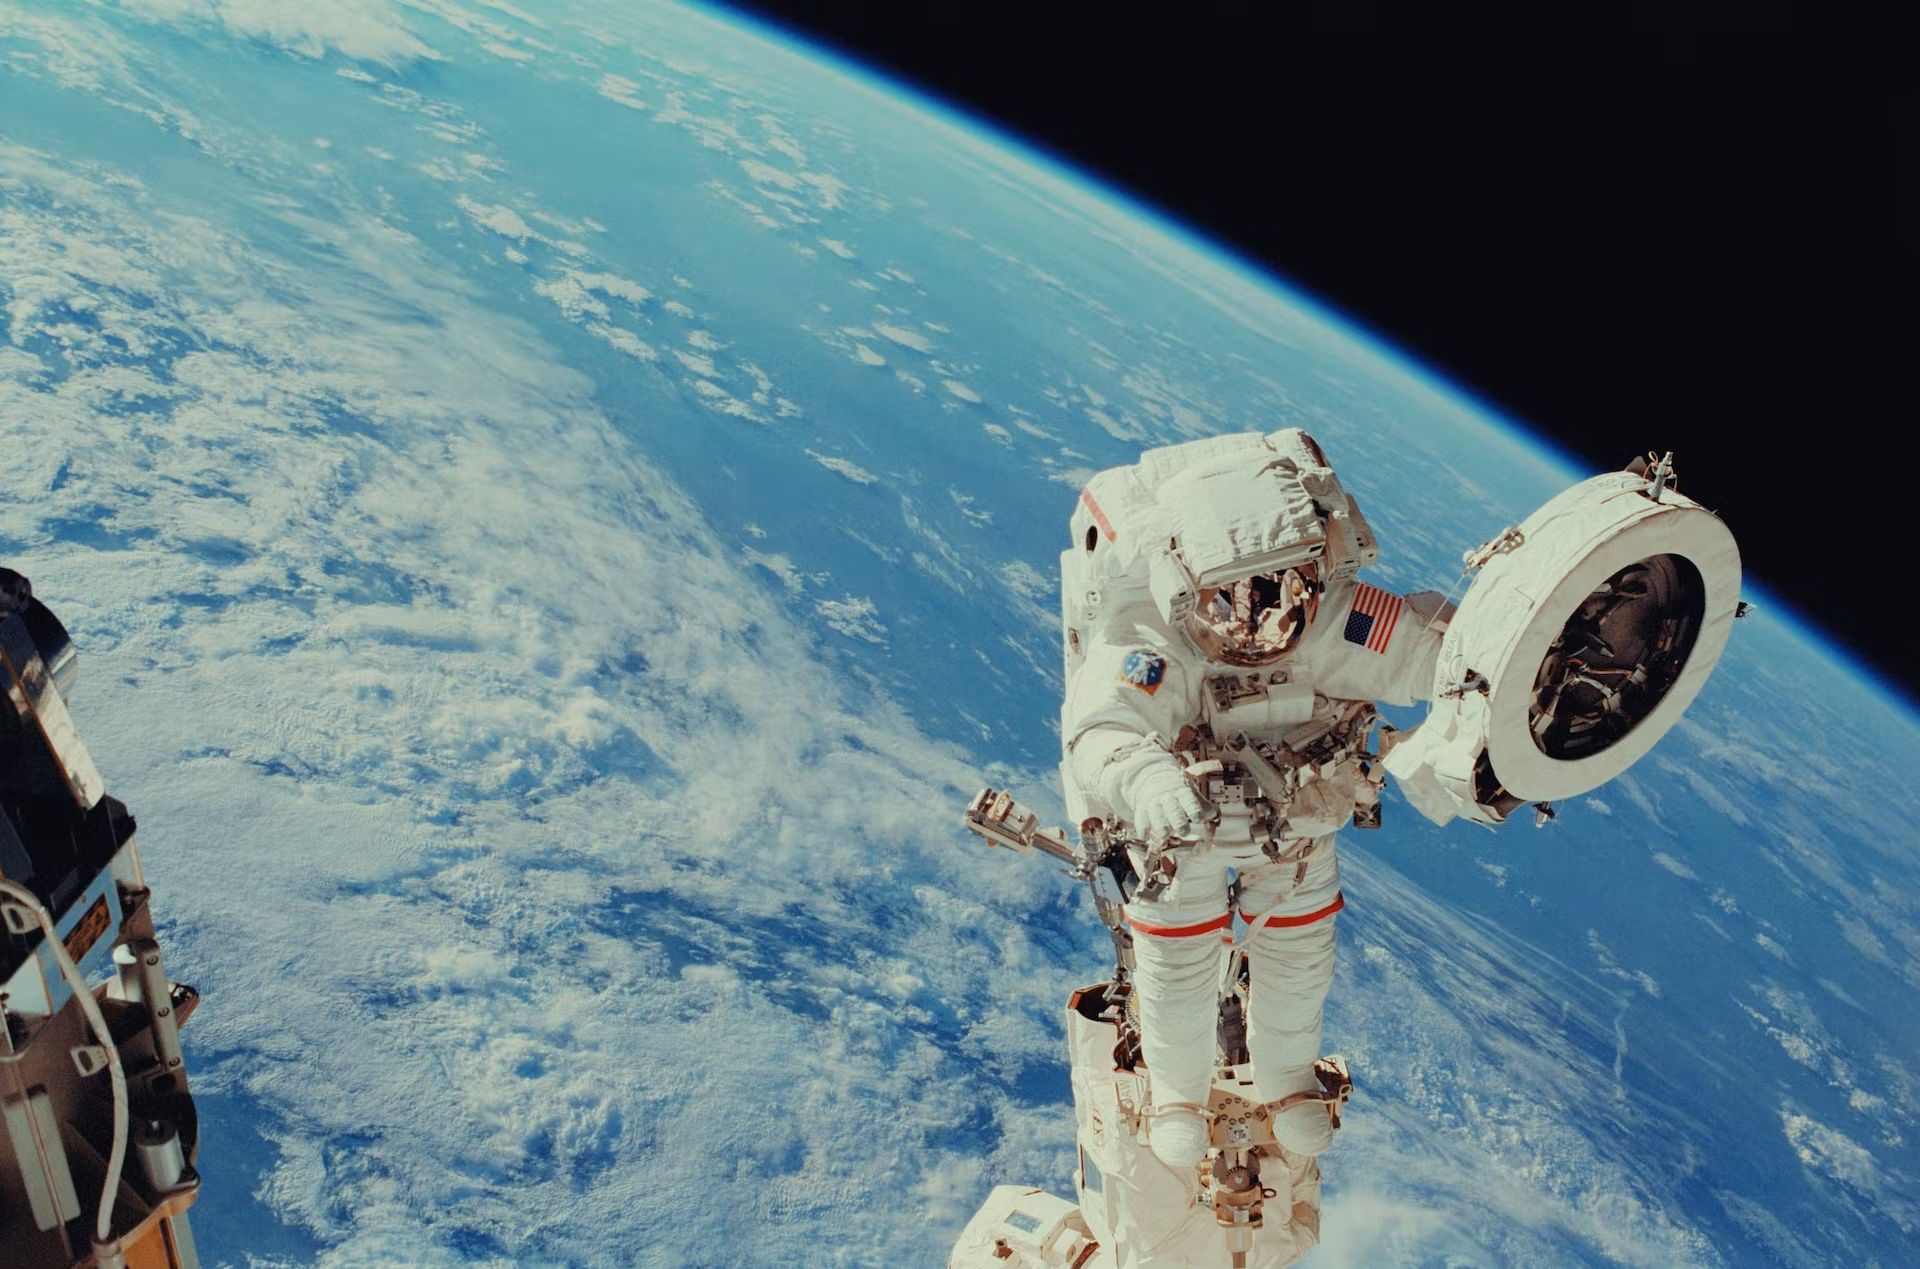 Background image of Earth and astronaut